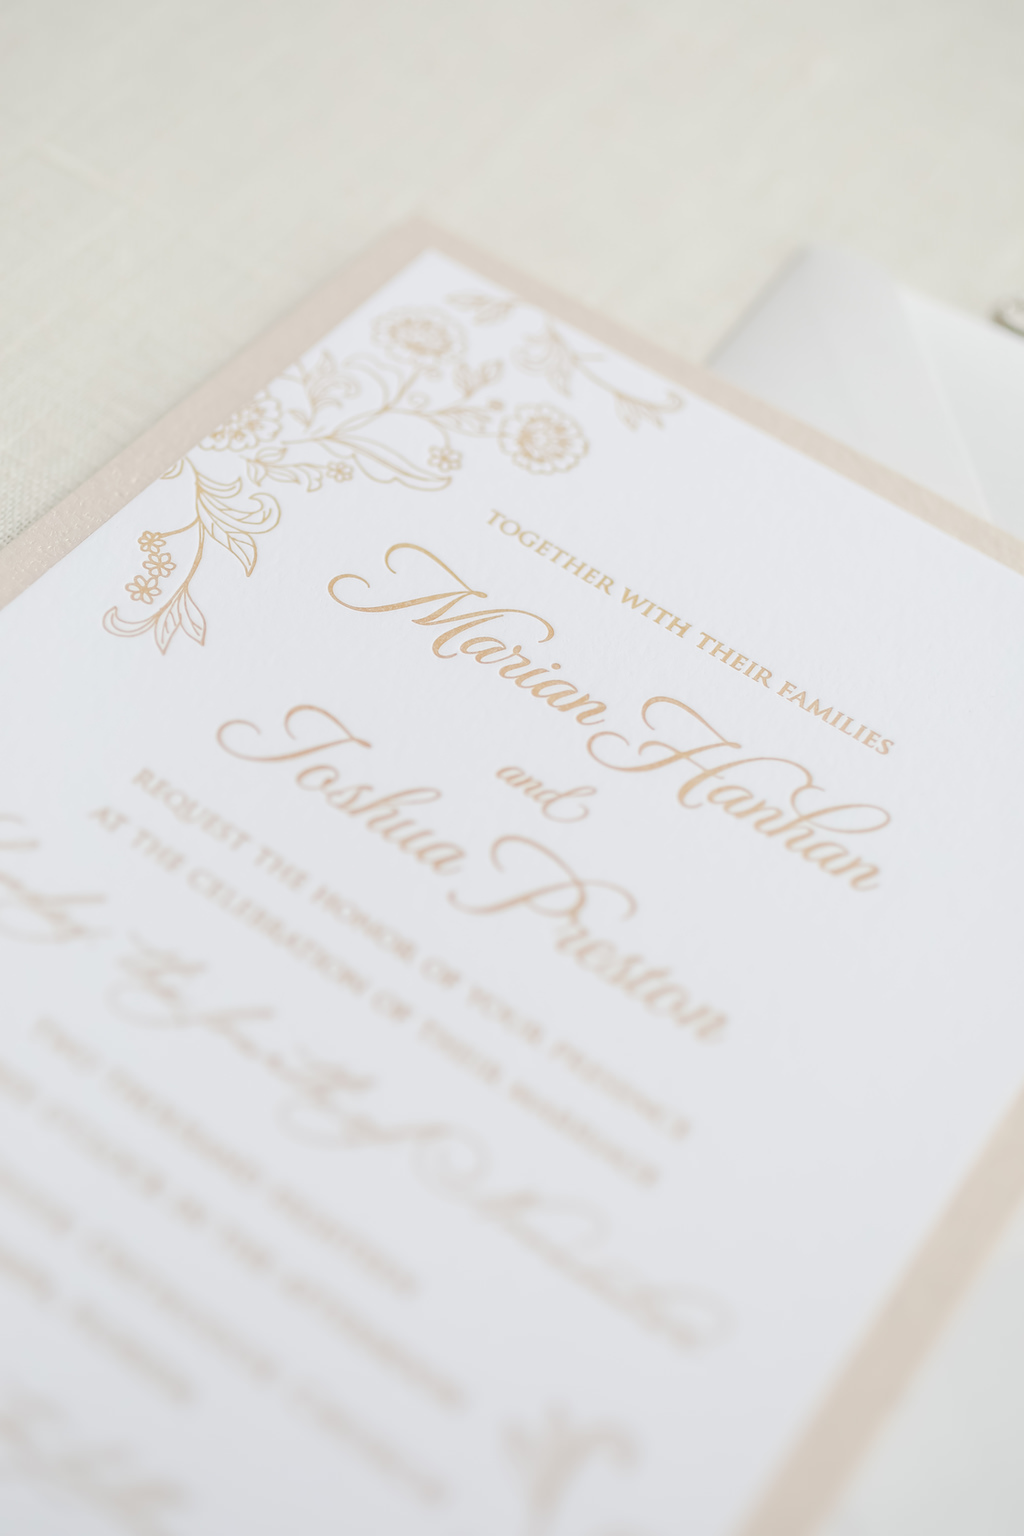 Tan, Brown, Nude and Ivory Classic Letterpress Wedding Invitation Suite with Floral Design | Tampa Bay Wedding Photographer Lifelong Photography Studio | Tampa Bay Stationery A&P Design Co